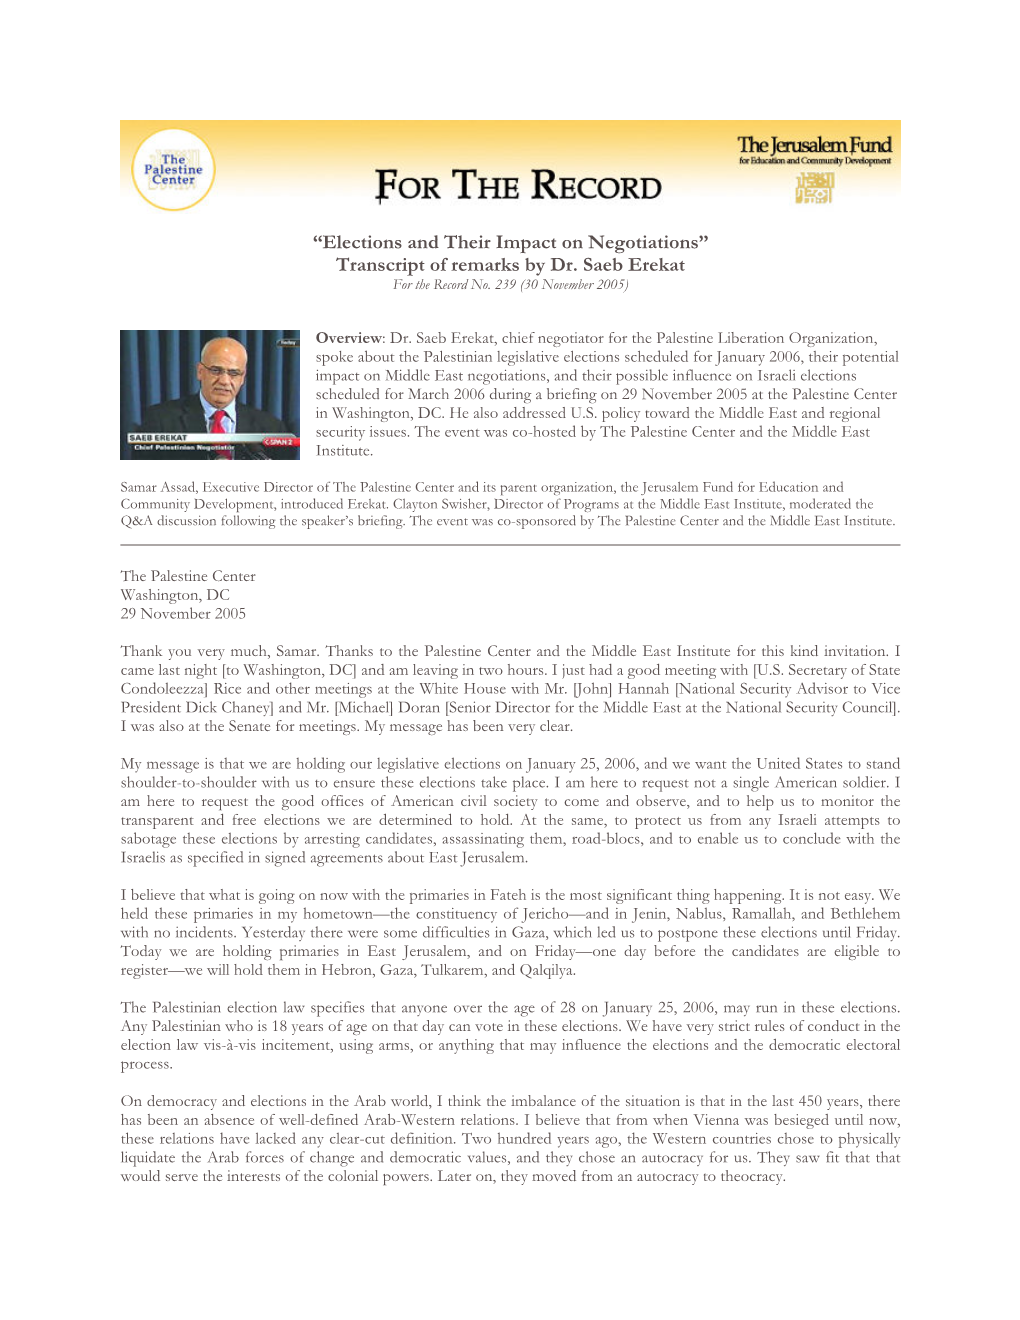 Transcript of Remarks by Dr. Saeb Erekat for the Record No